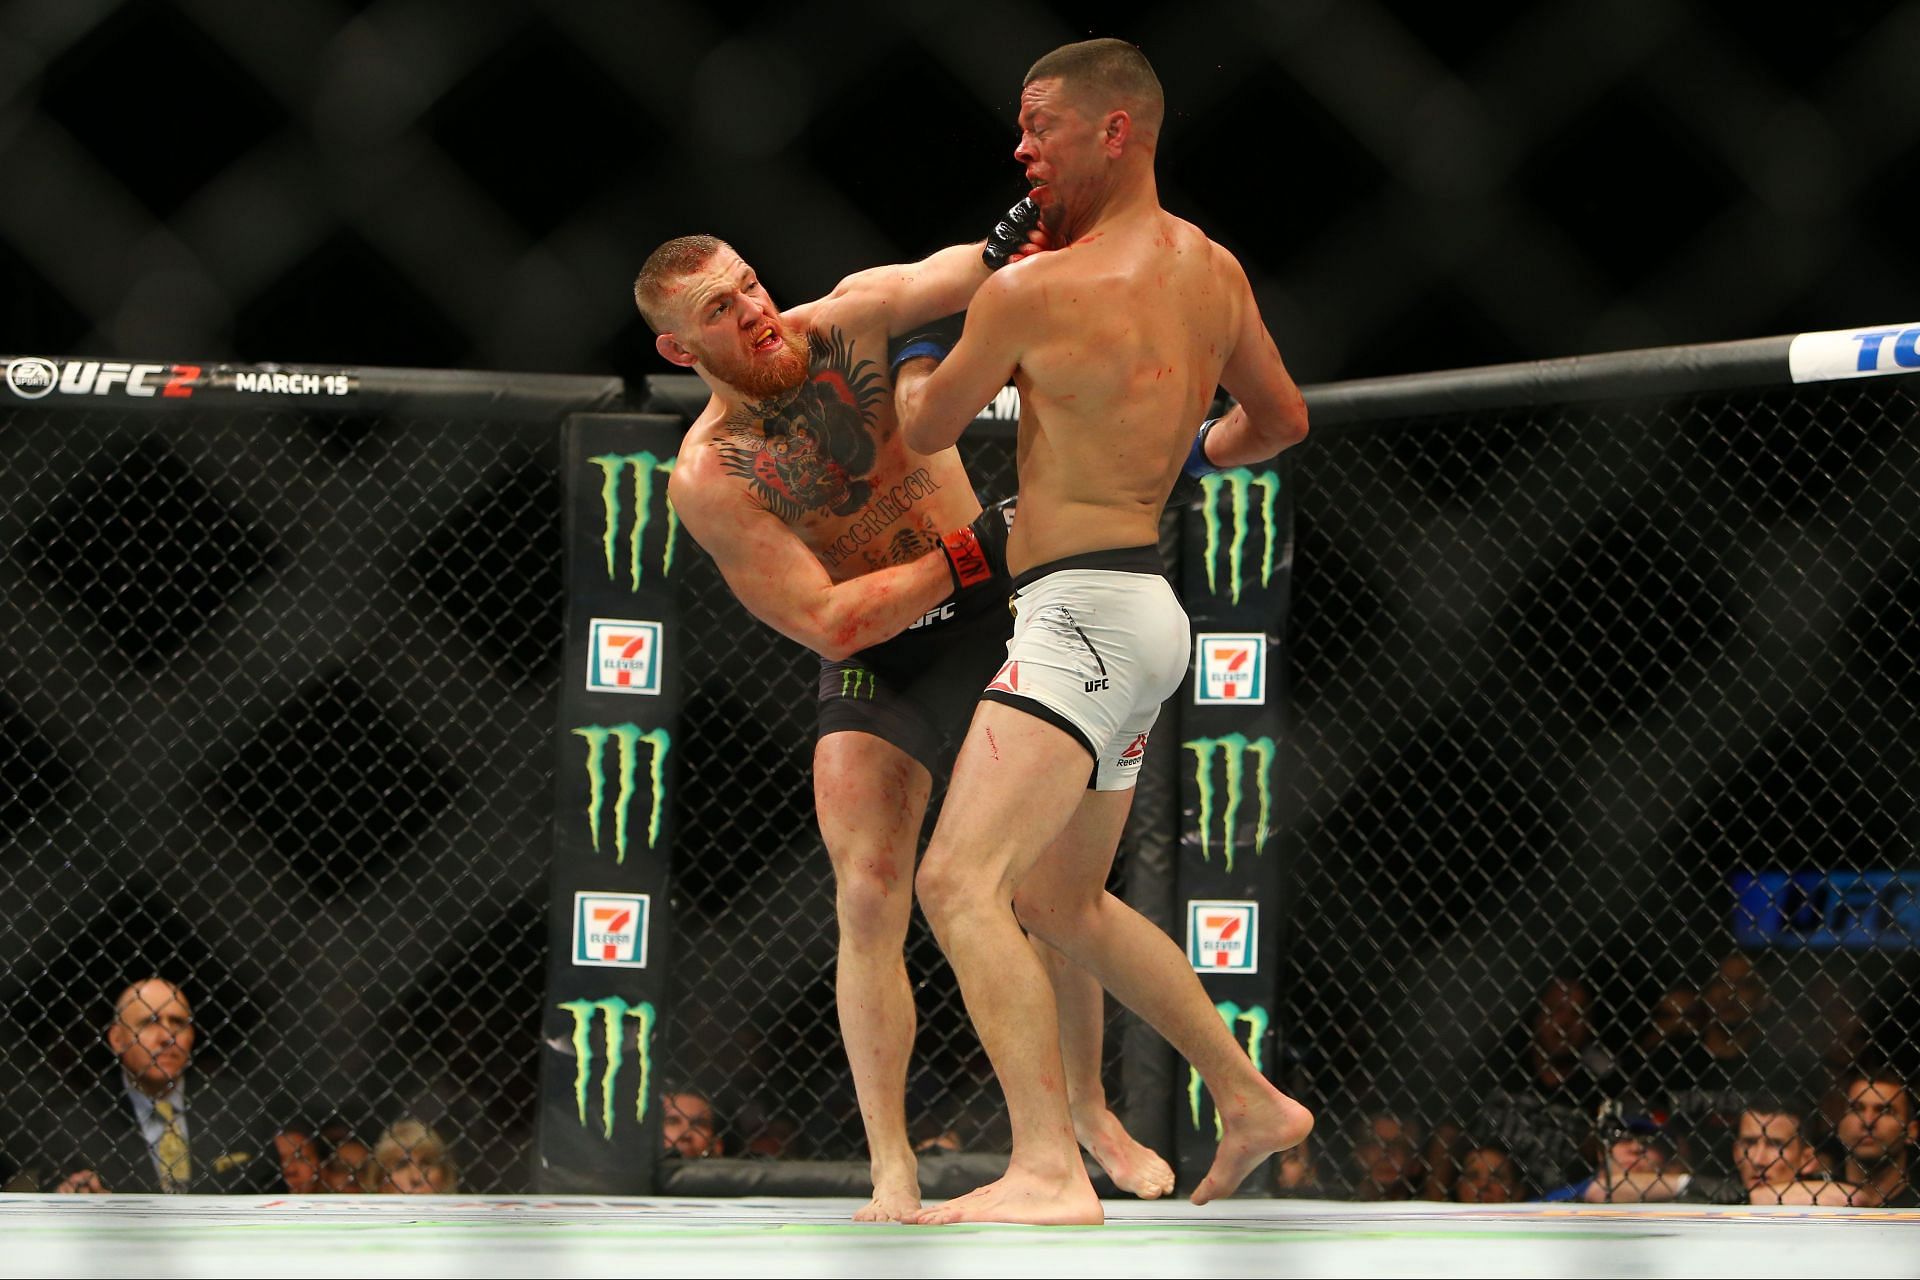 Is 2022 finally the right time for the UFC to book a third bout between Conor McGregor and Nate Diaz?